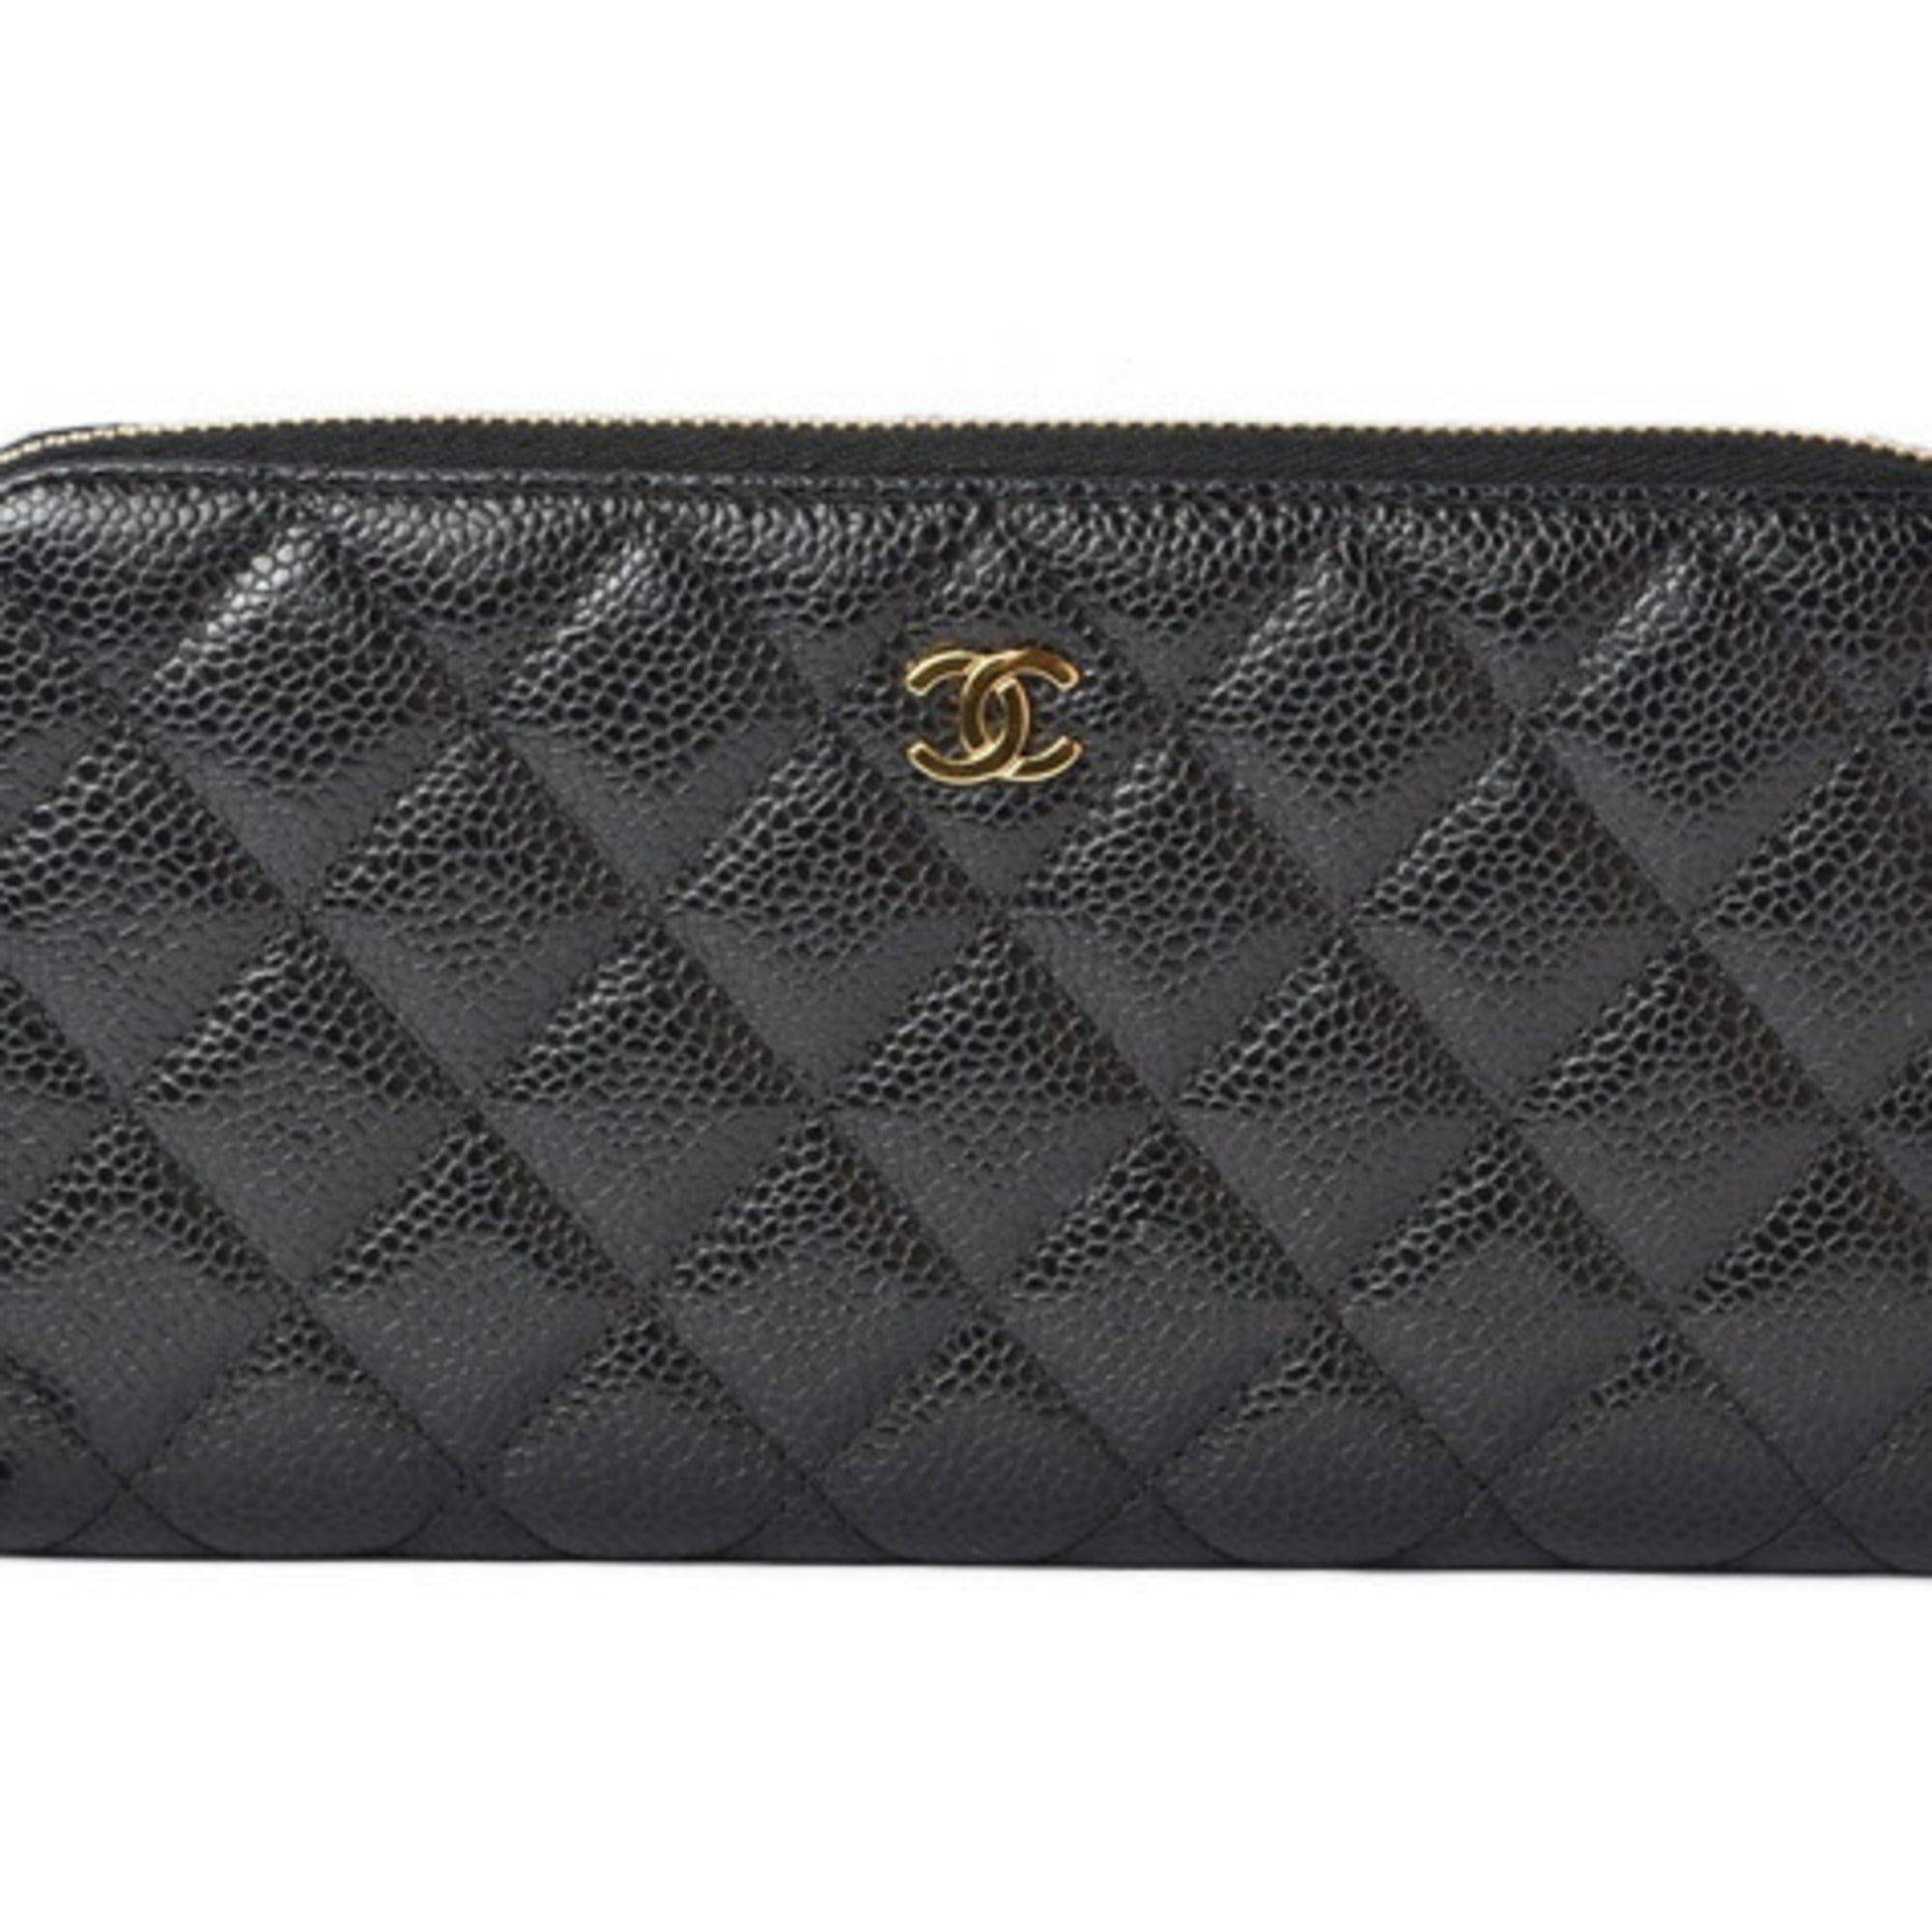 Authenticated Used Chanel wallet CHANEL long quilting matelasse caviar skin  black A50097 